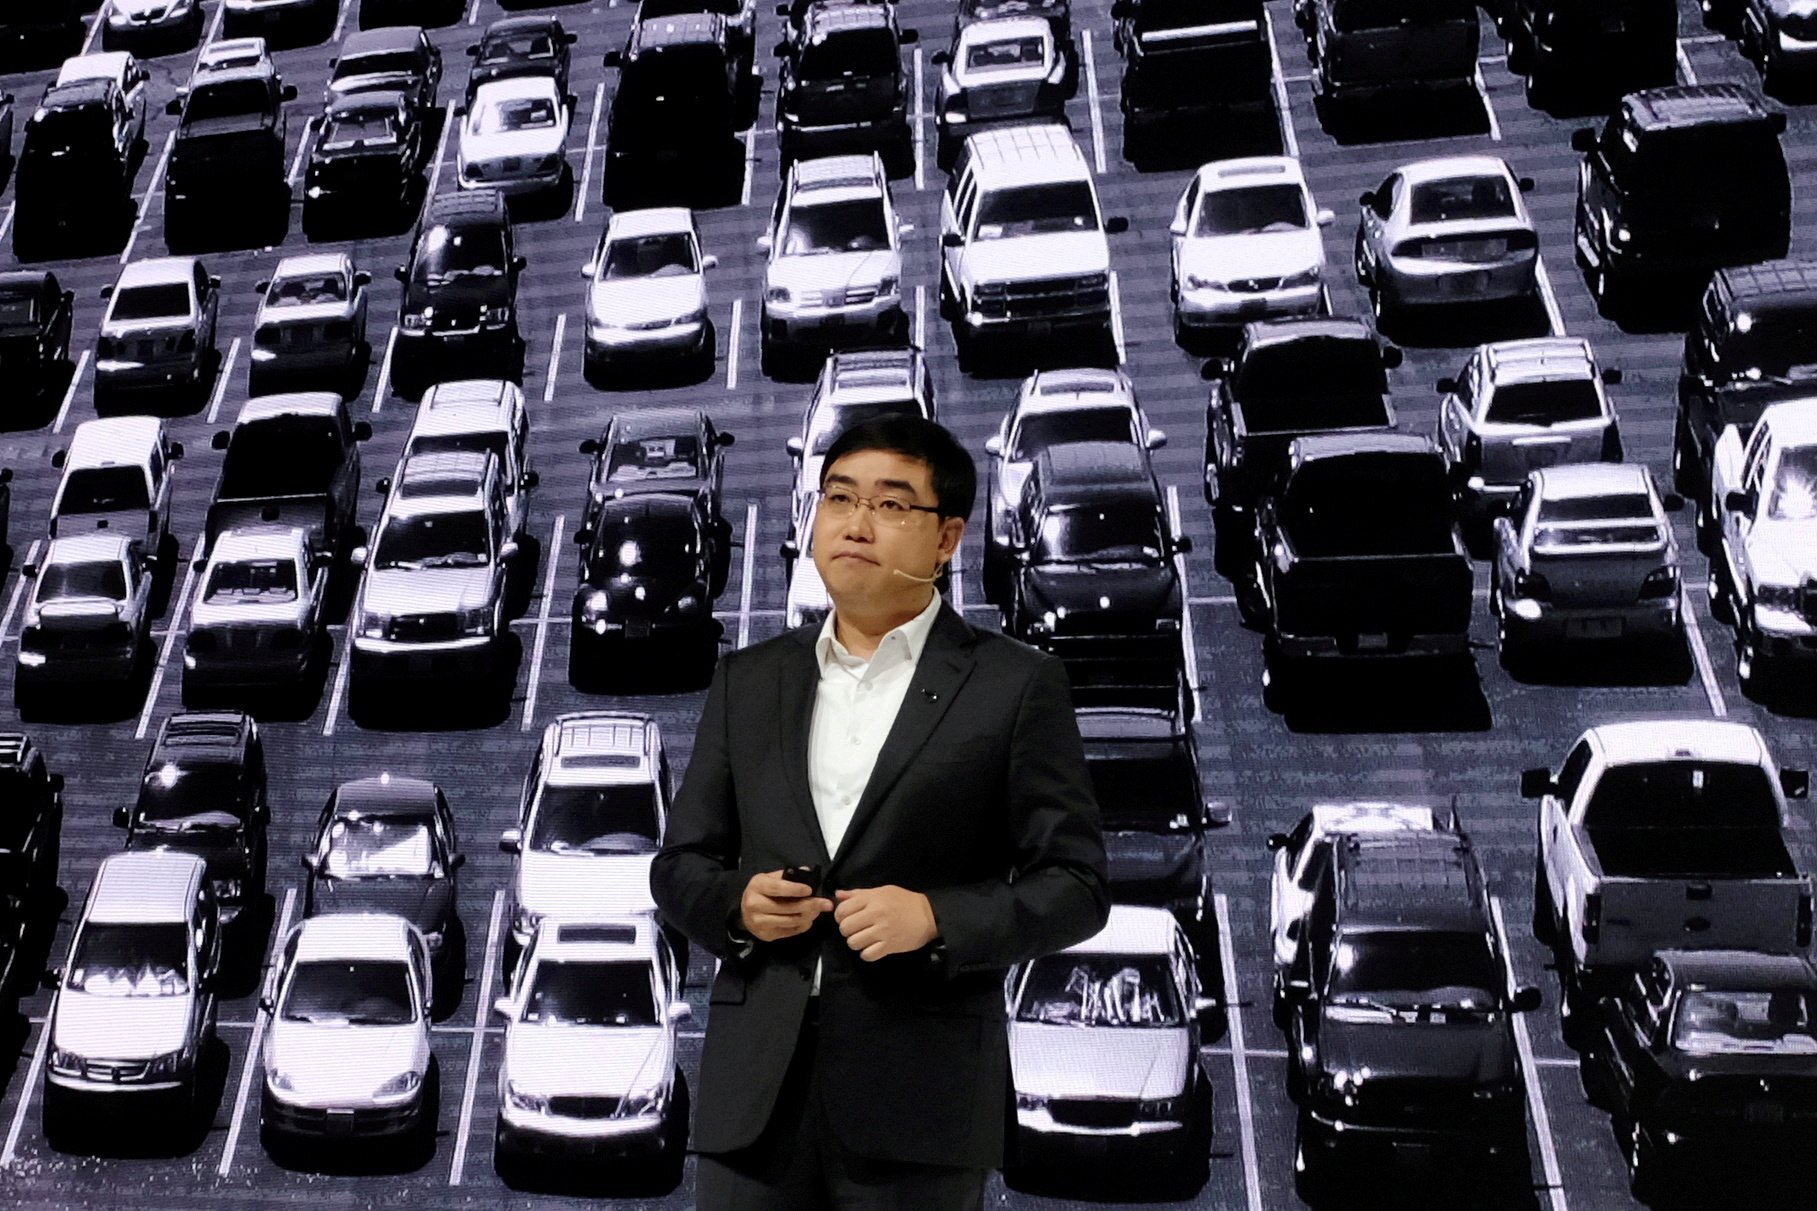 Didi Chuxing’s CEO Cheng Wei (also known as Will Wei Cheng) has grown his ride hailing app into a multi billion dollar global company. Photo: Reuters